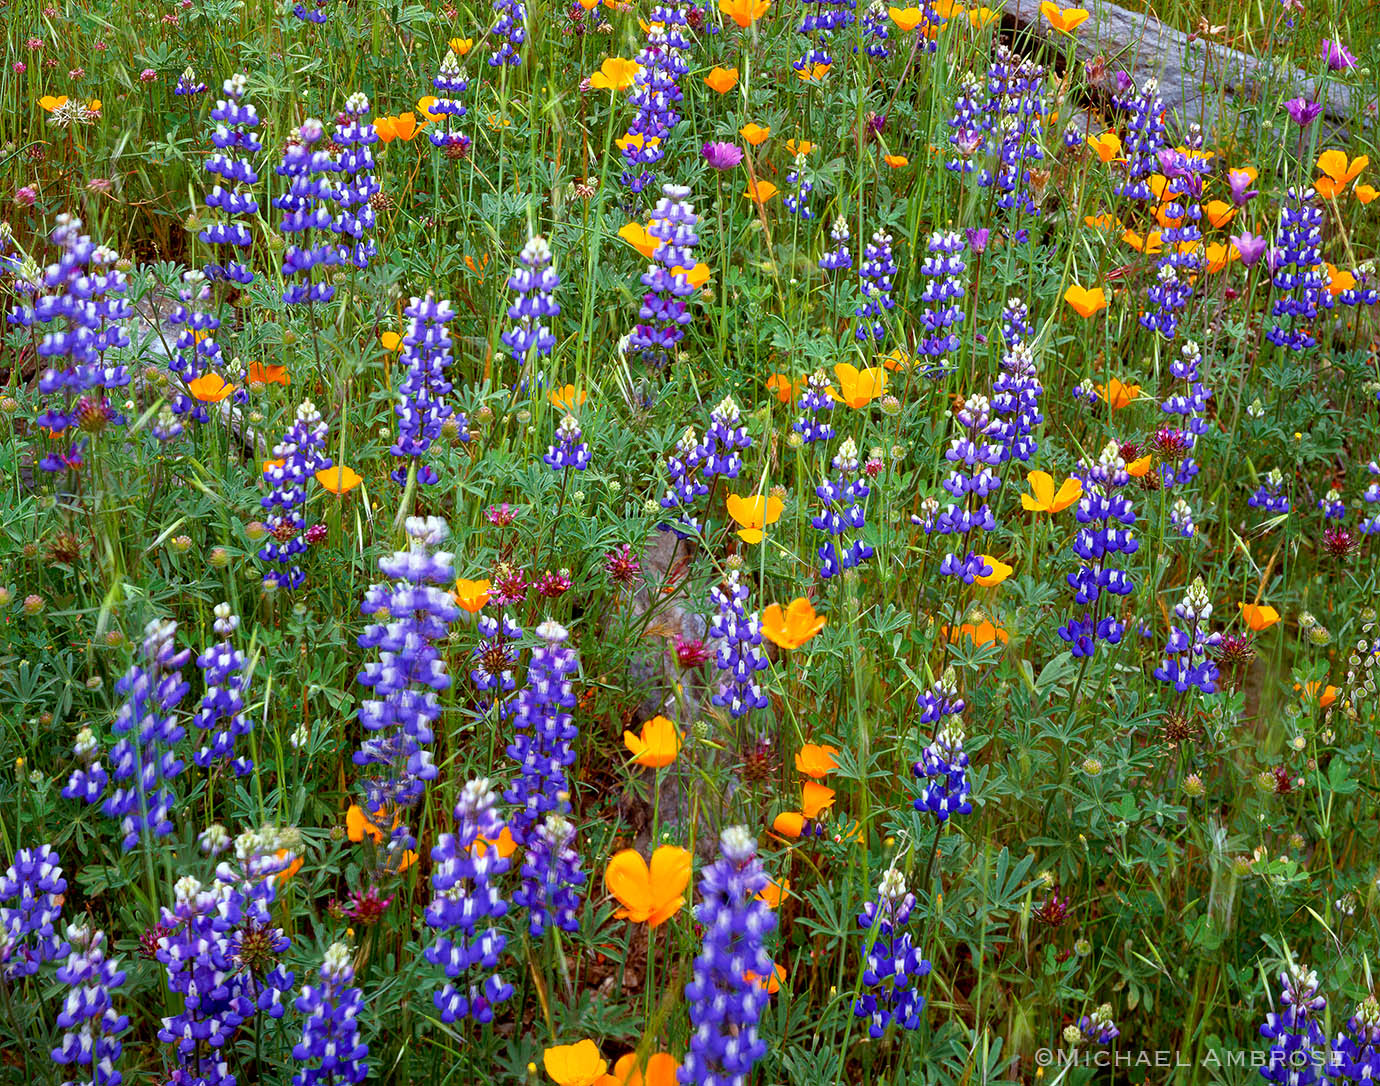 Lupin and other California wildflowers celebrate spring near Yosemite in the California foothills.